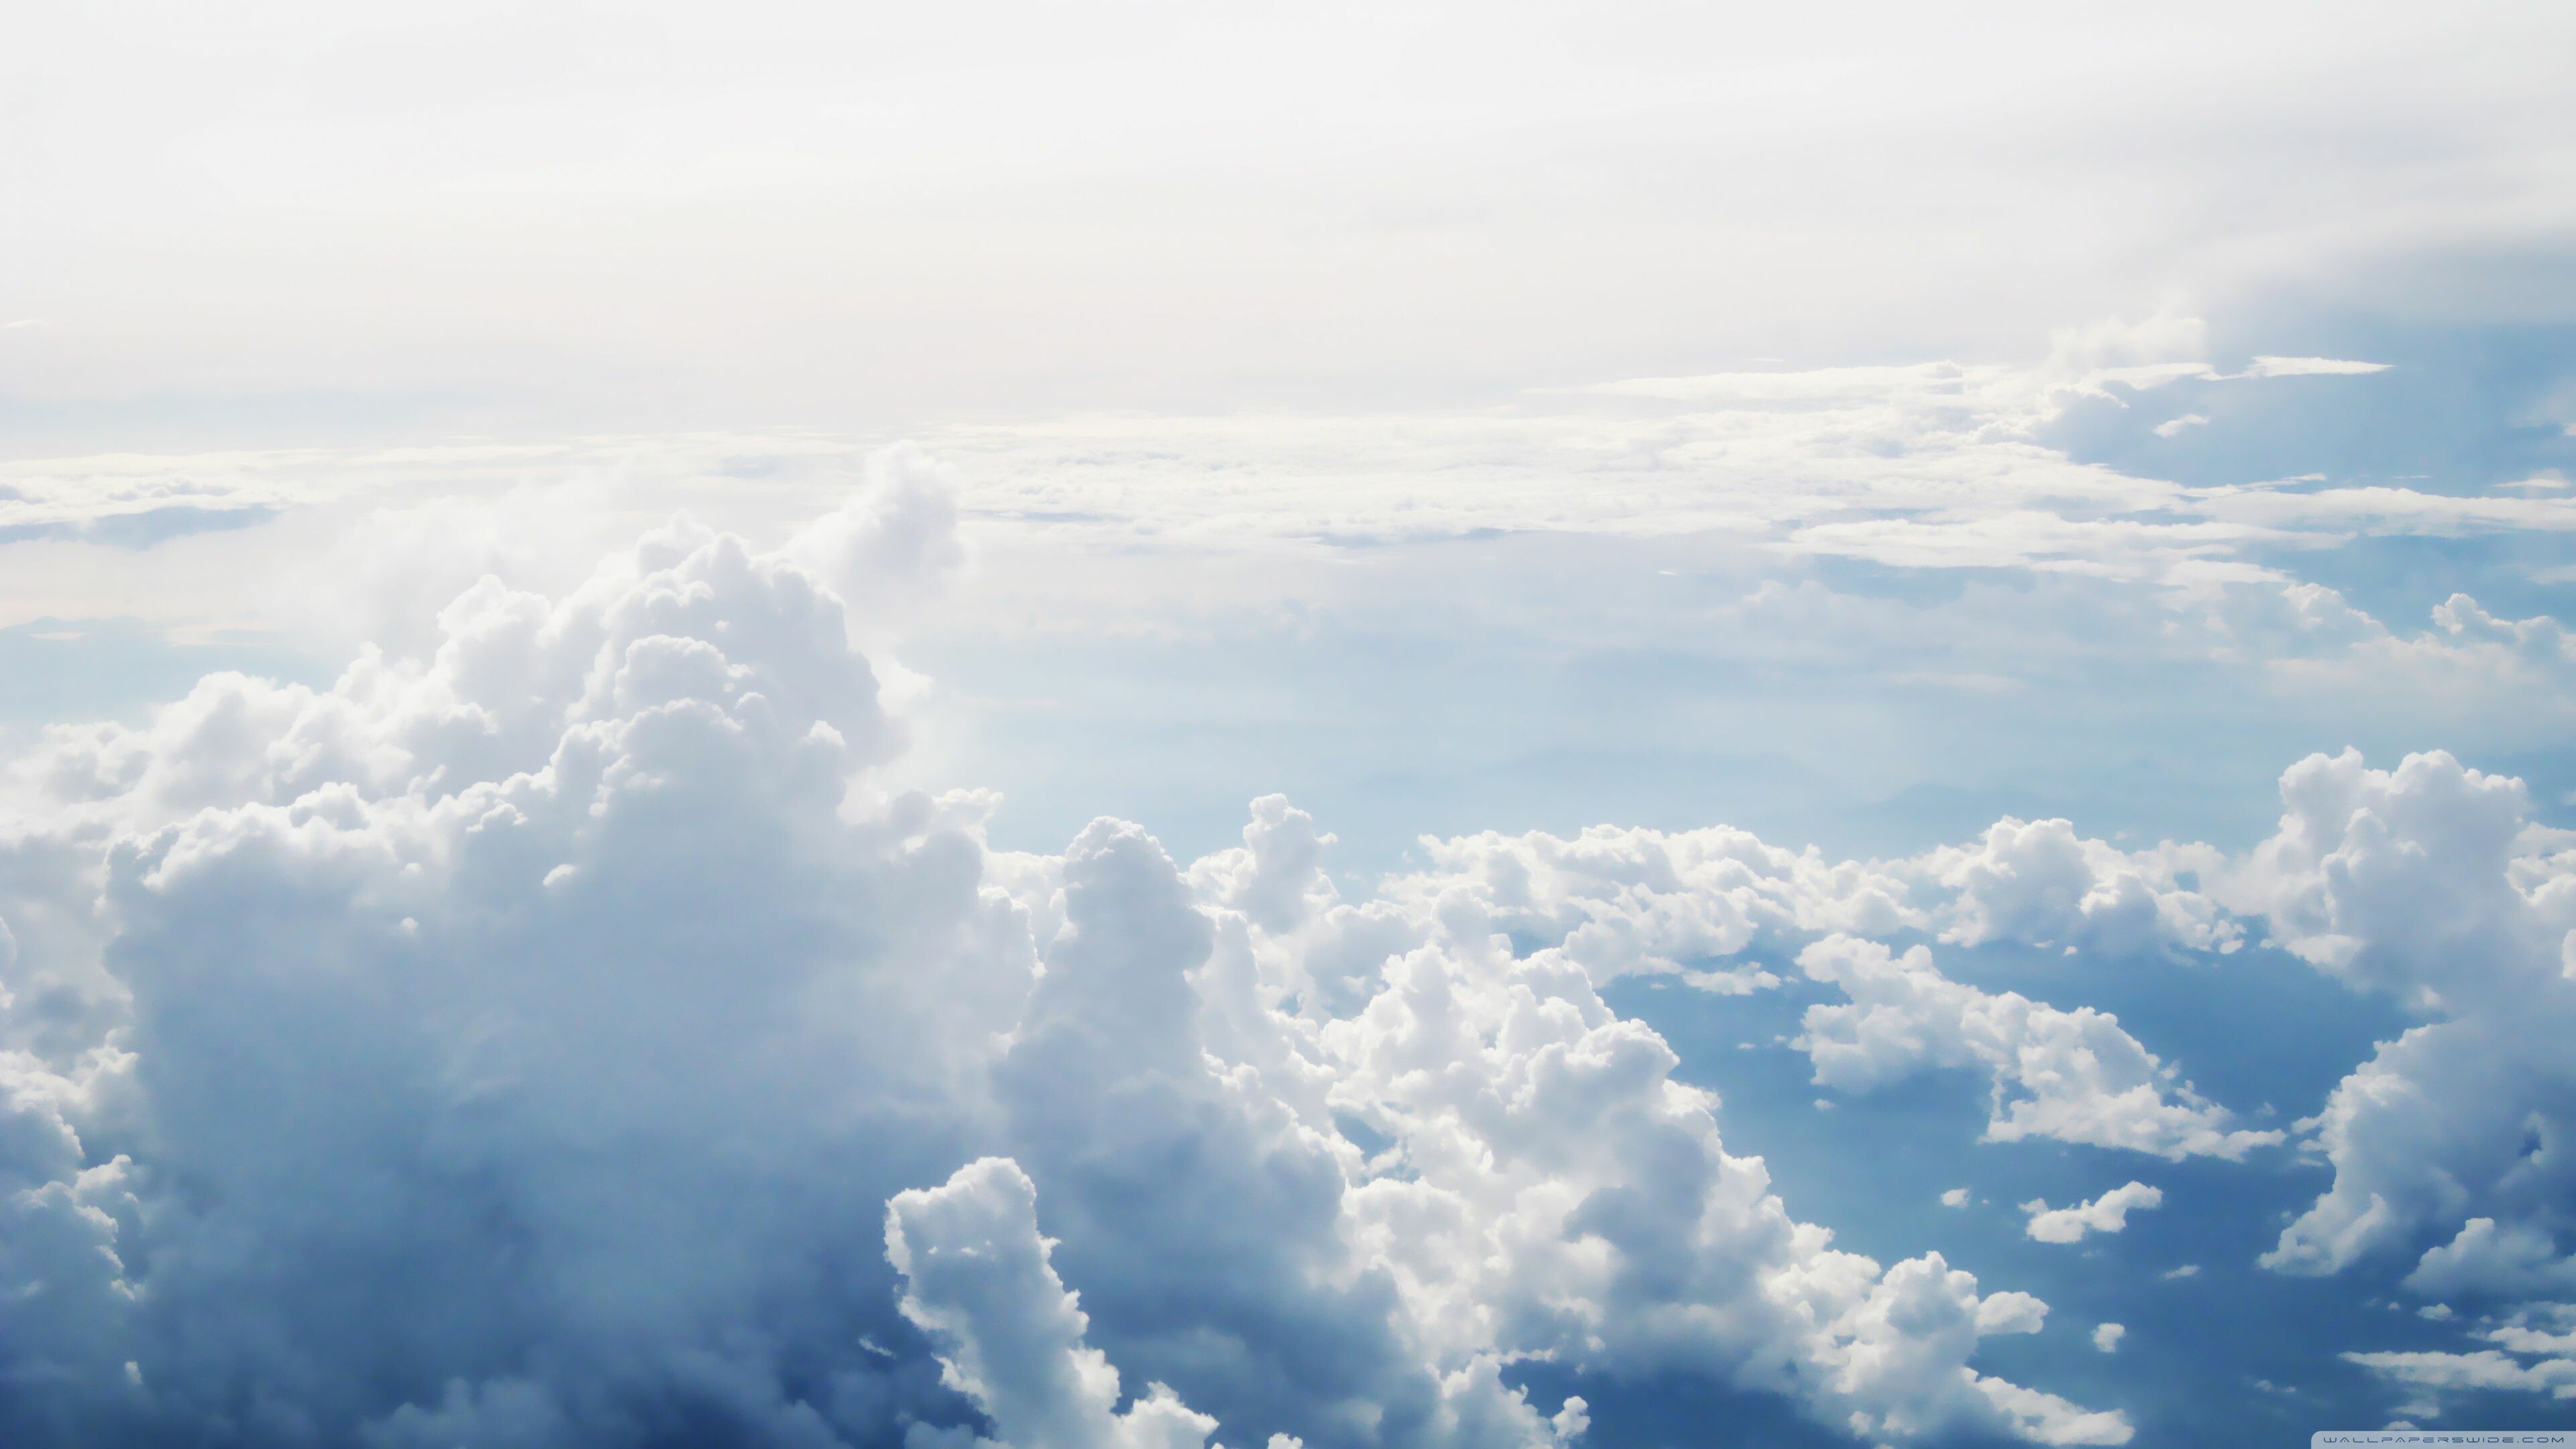 11 Best Clouds wallpapers for iPhone (Free 4k download) - iGeeksBlog